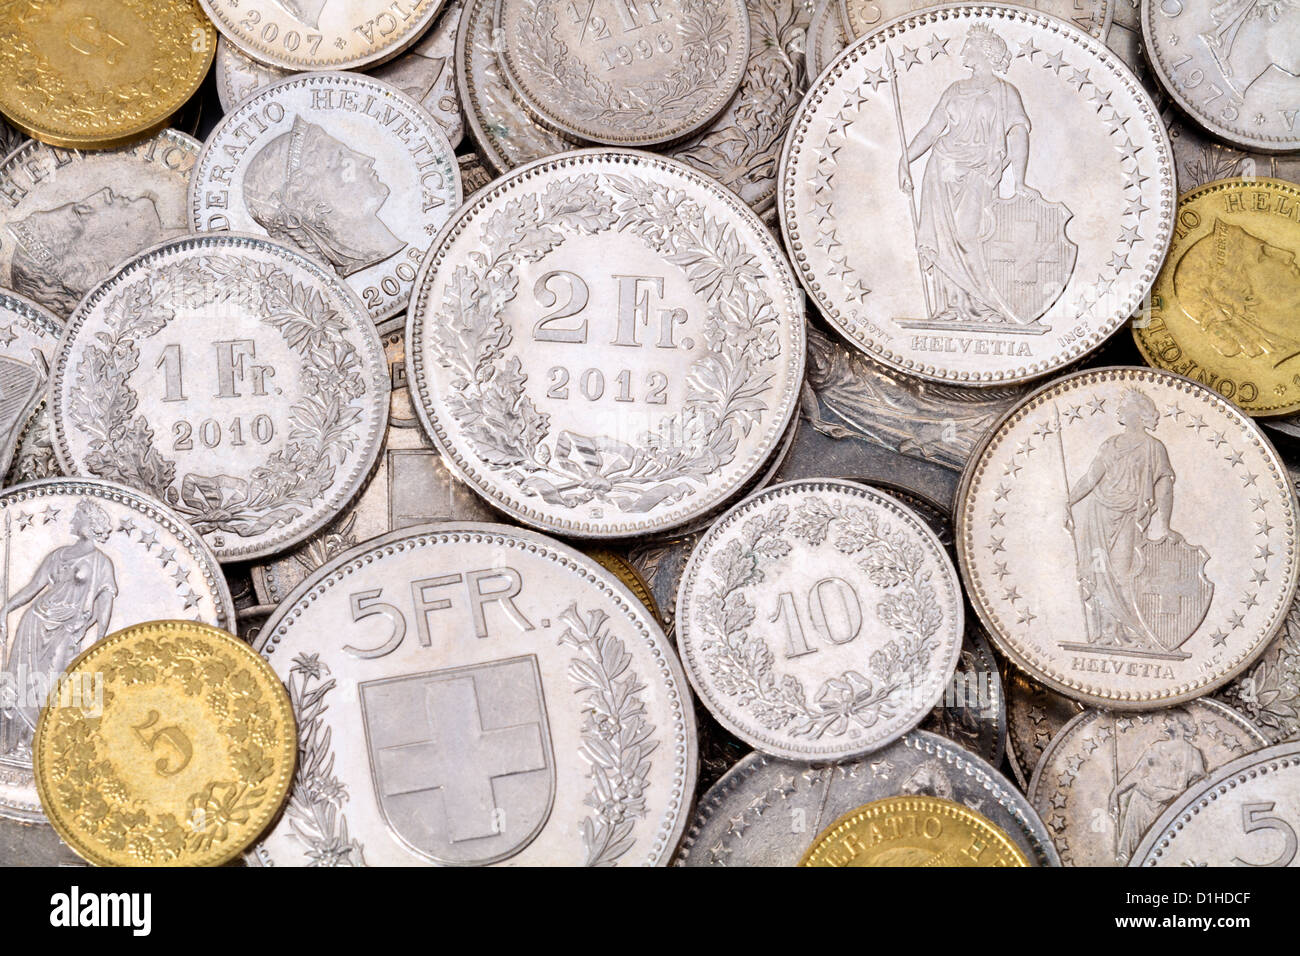 A pile of current, legal tender Swiss Francs (CHF) coins. All current Swiss coin denominations are represented in this image. Stock Photo